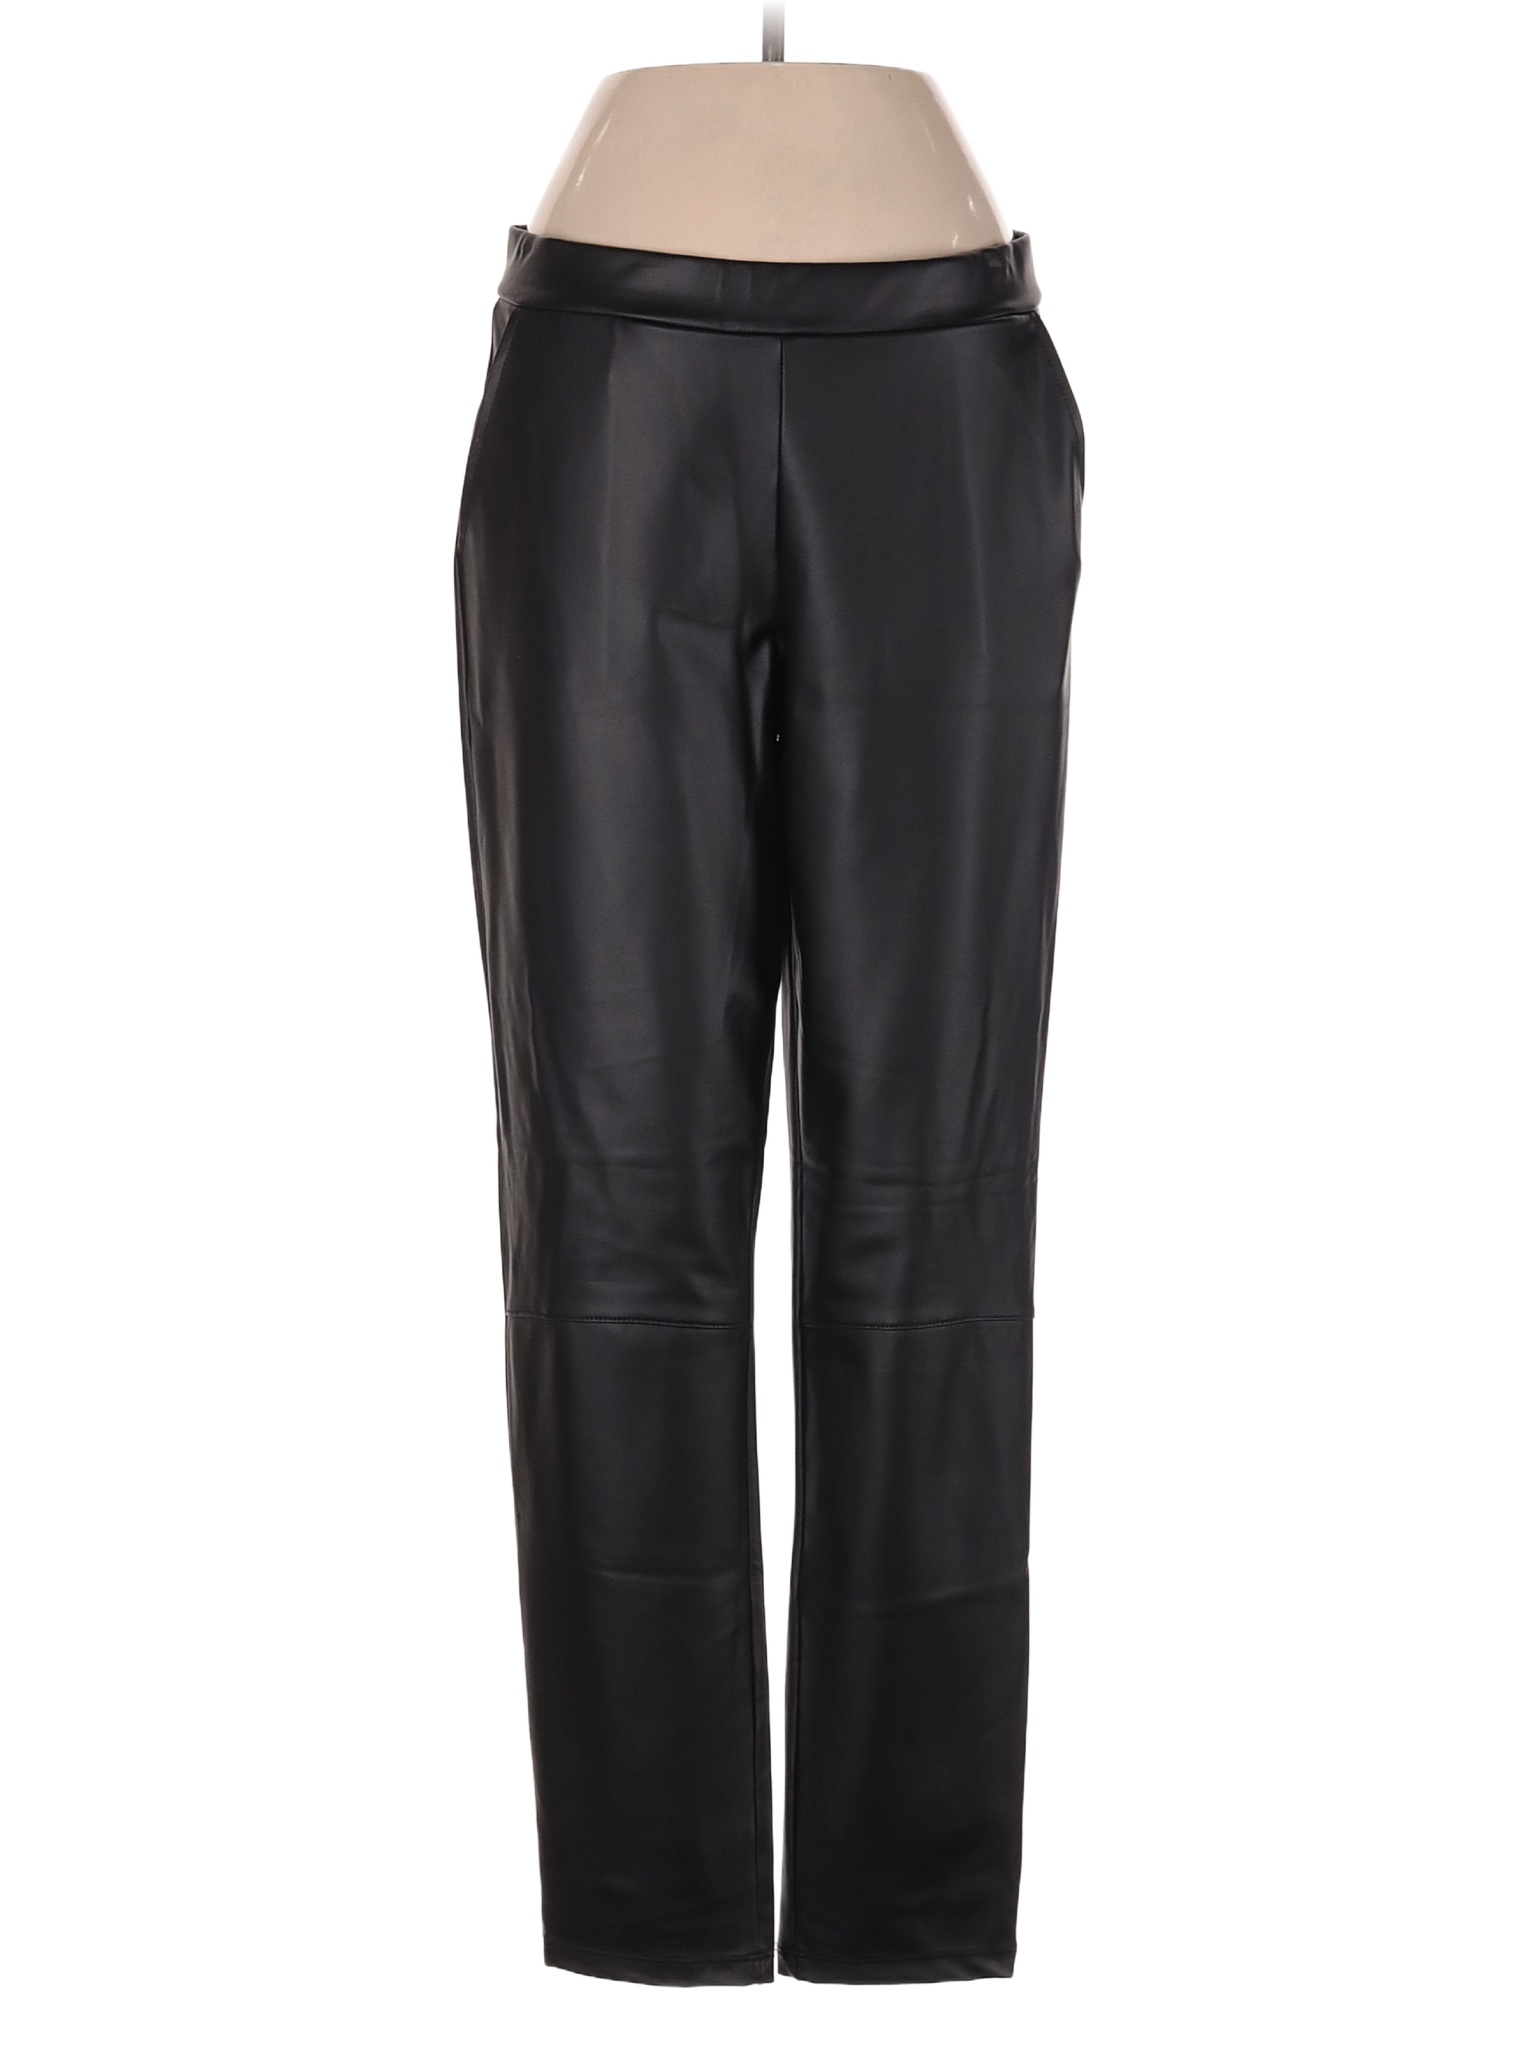 Clara Sun Woo Solid Black Faux Leather Pants Size S - 78% off | thredUP